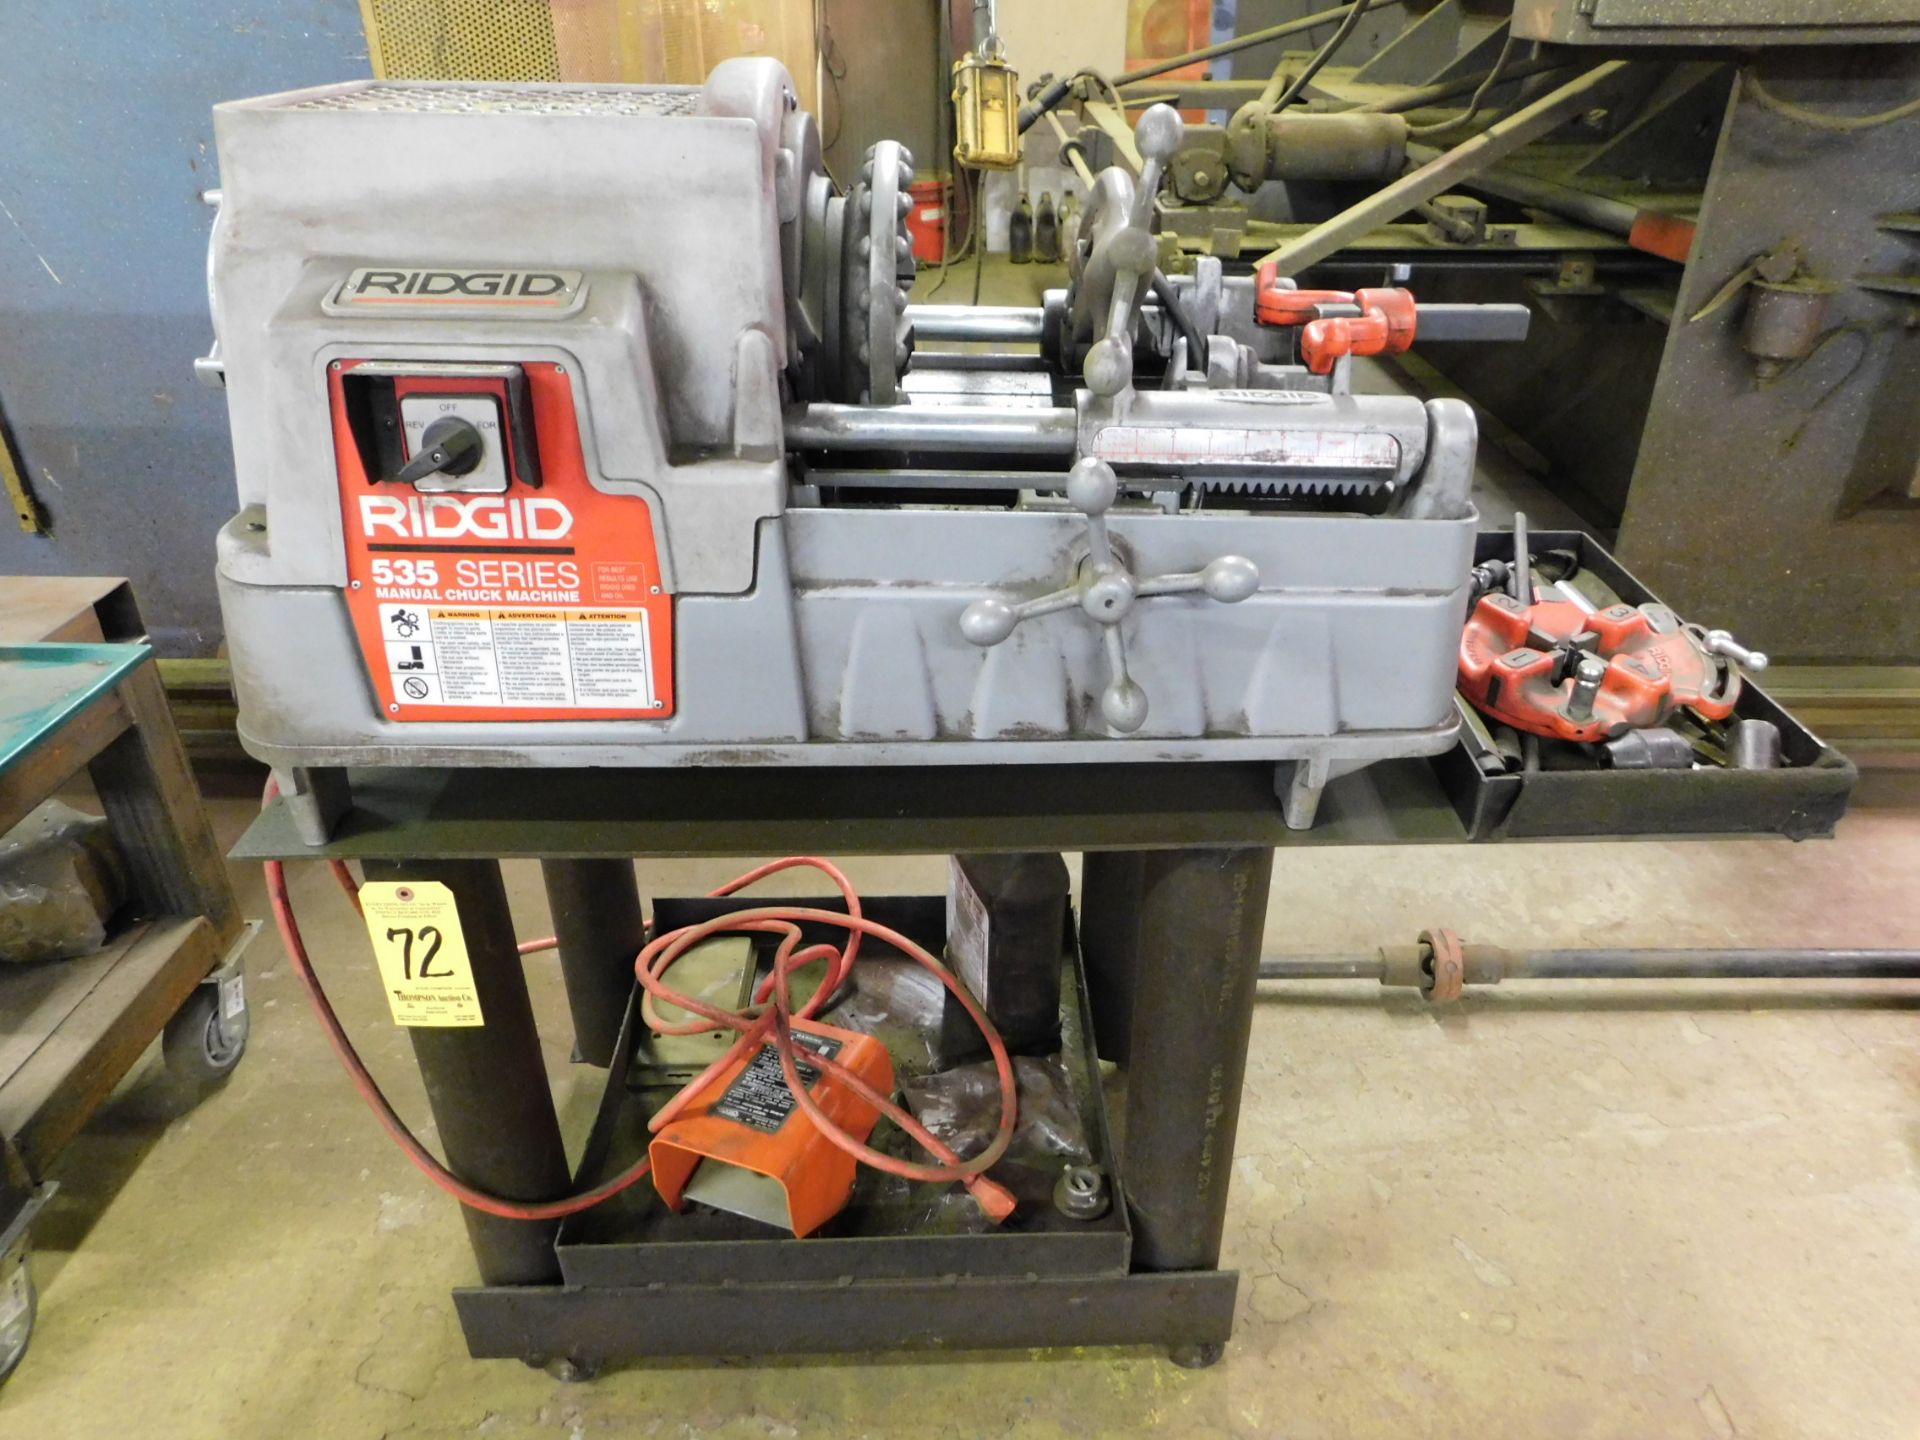 Ridgid Model 535 Pipe Threader, s/n EBE13544-0810, with Model 811A Die, Foot Pedal Controls